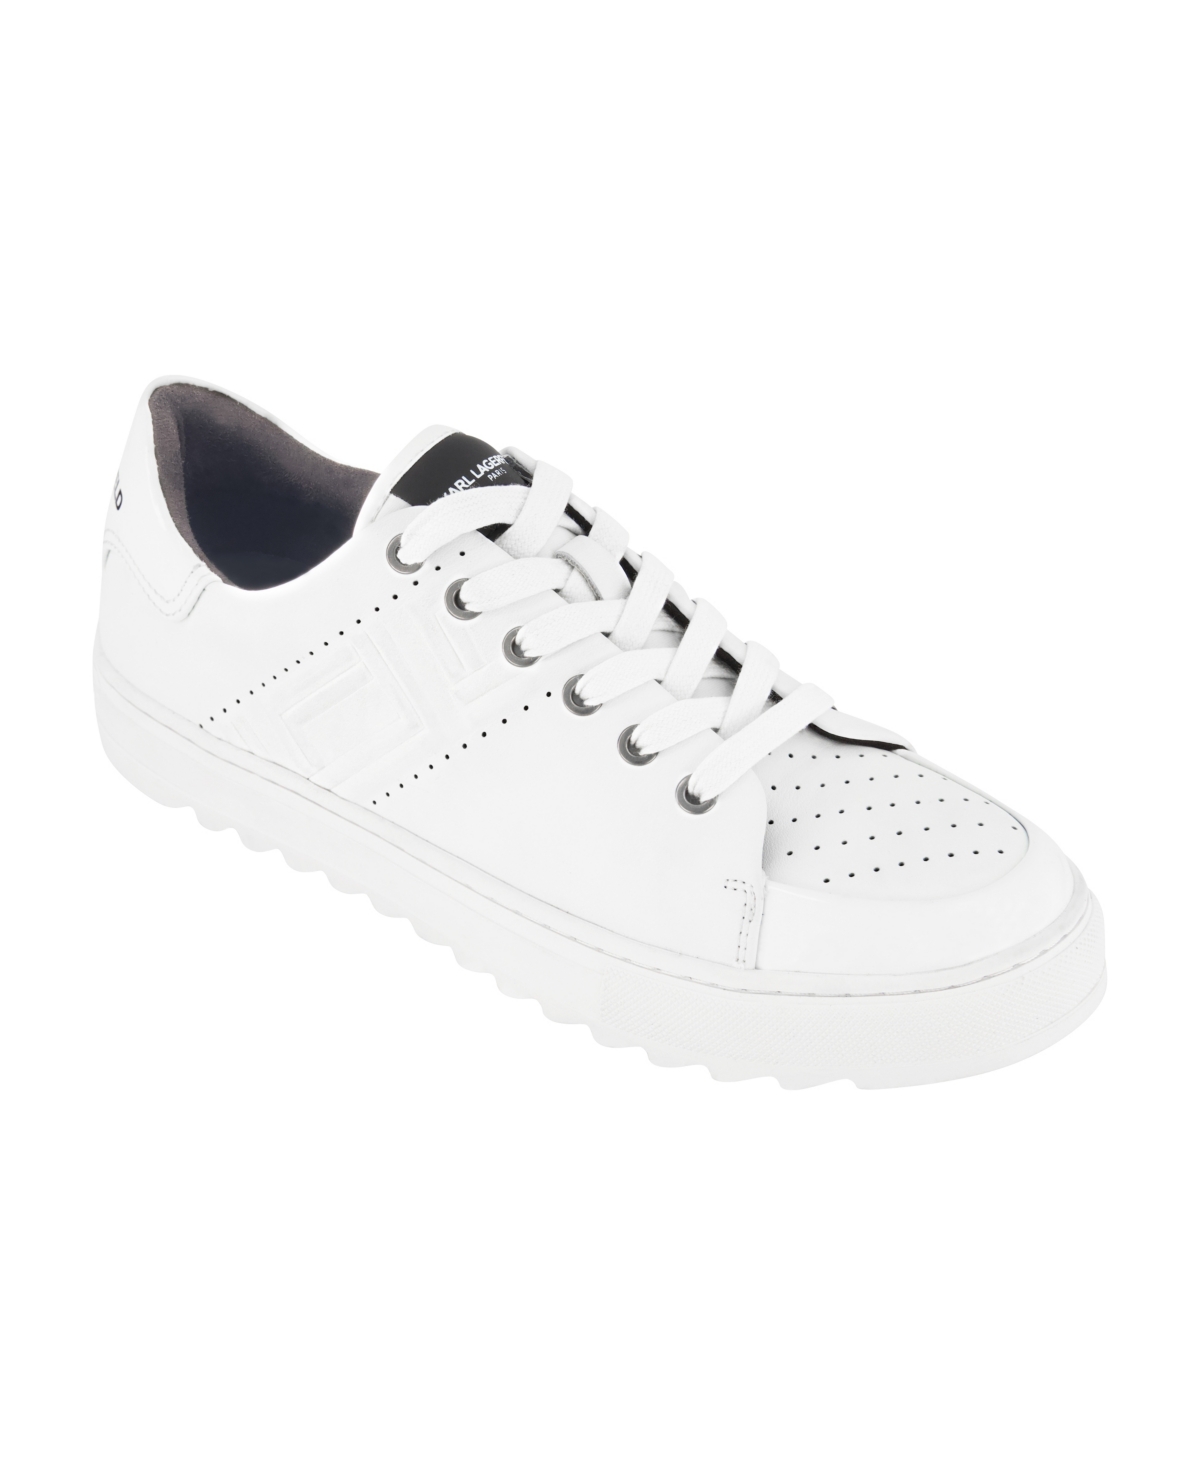 KARL LAGERFELD MEN'S SIDE EMBOSSED LOGO AND PATENT DETAIL LEATHER SNEAKERS